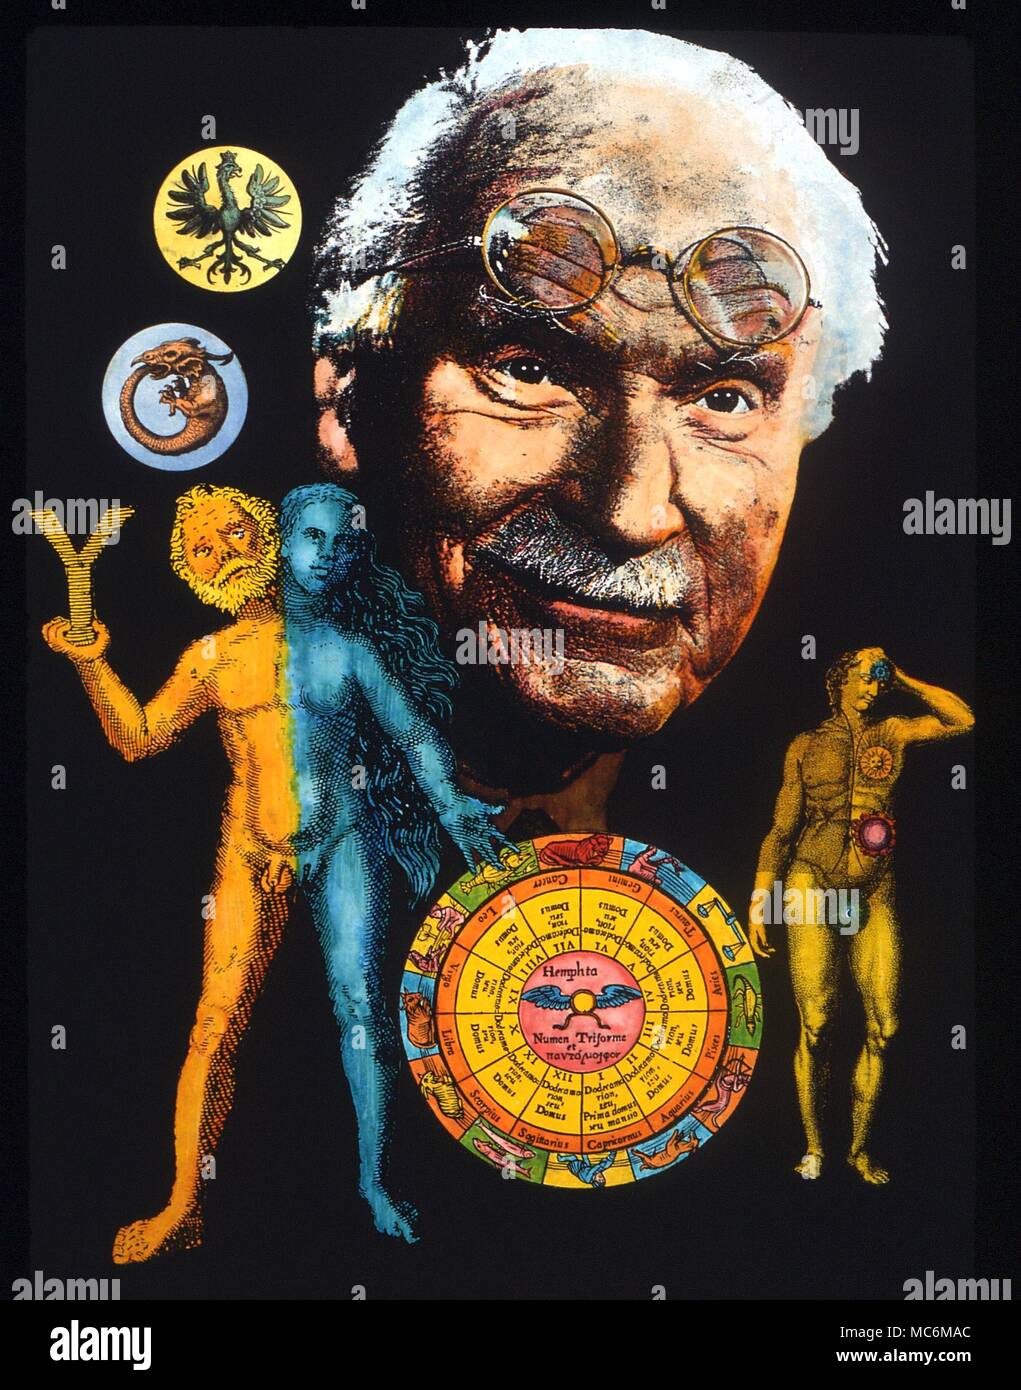 ALCHEMY - Portrait of the modern psychologist C G Jung, surrounded by a pastiche of alchemical symbols, including the ouroboros, the Pythagorean Y, and the volatile Eagle of the alchemical process Stock Photo